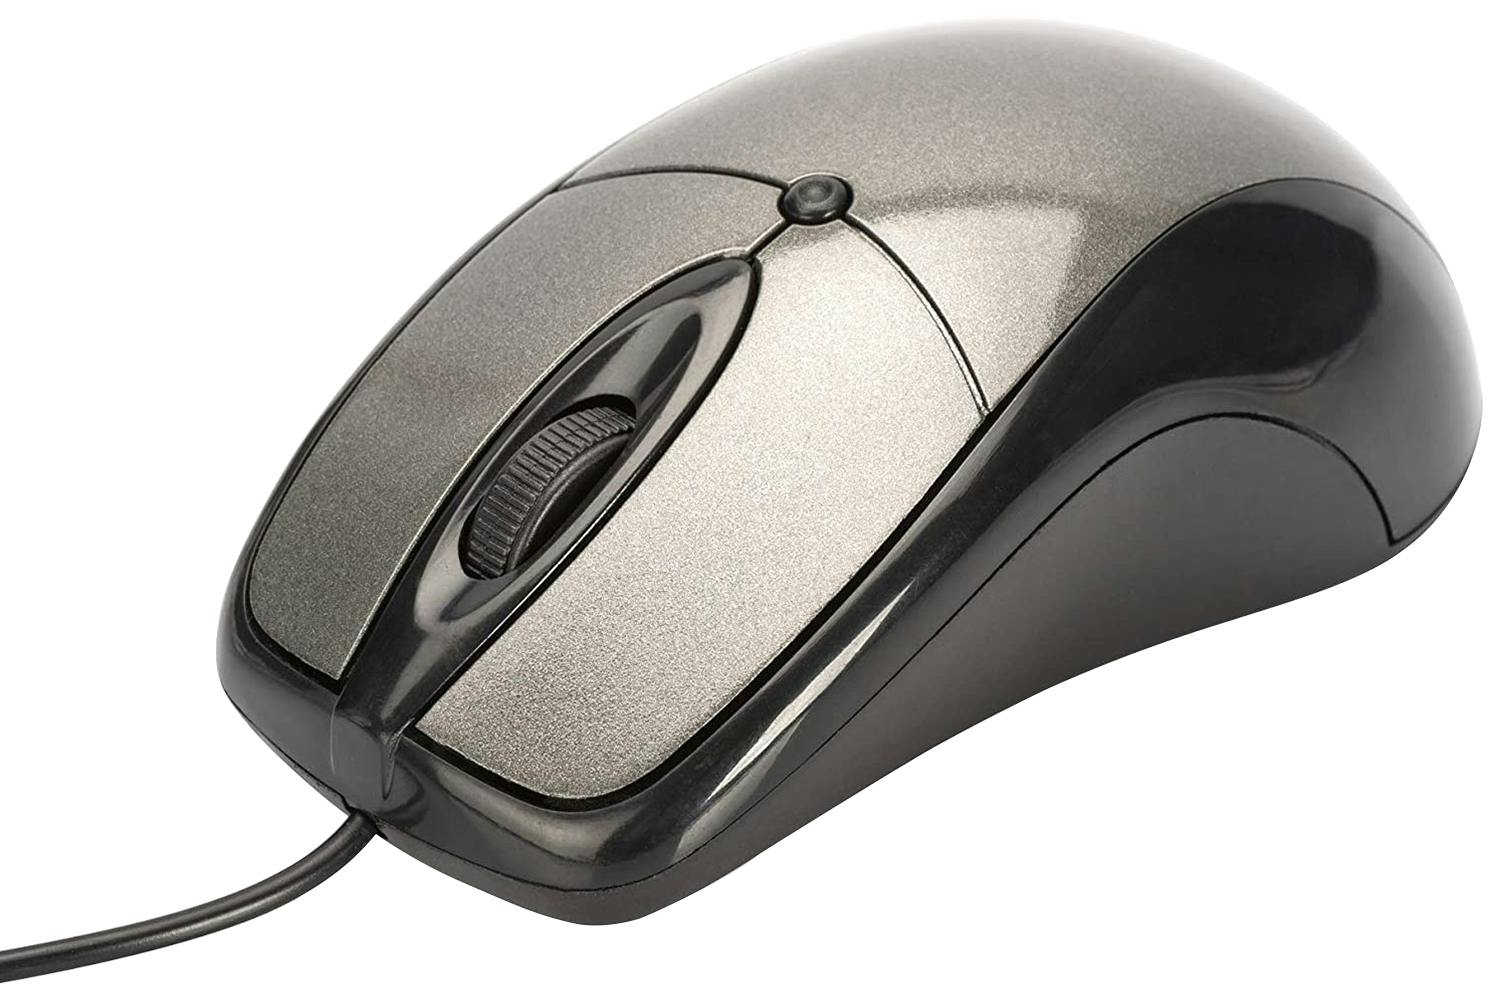 Ednet Optical 3 Buttons + Scroll Wheel Mouse | Black/Anthracite